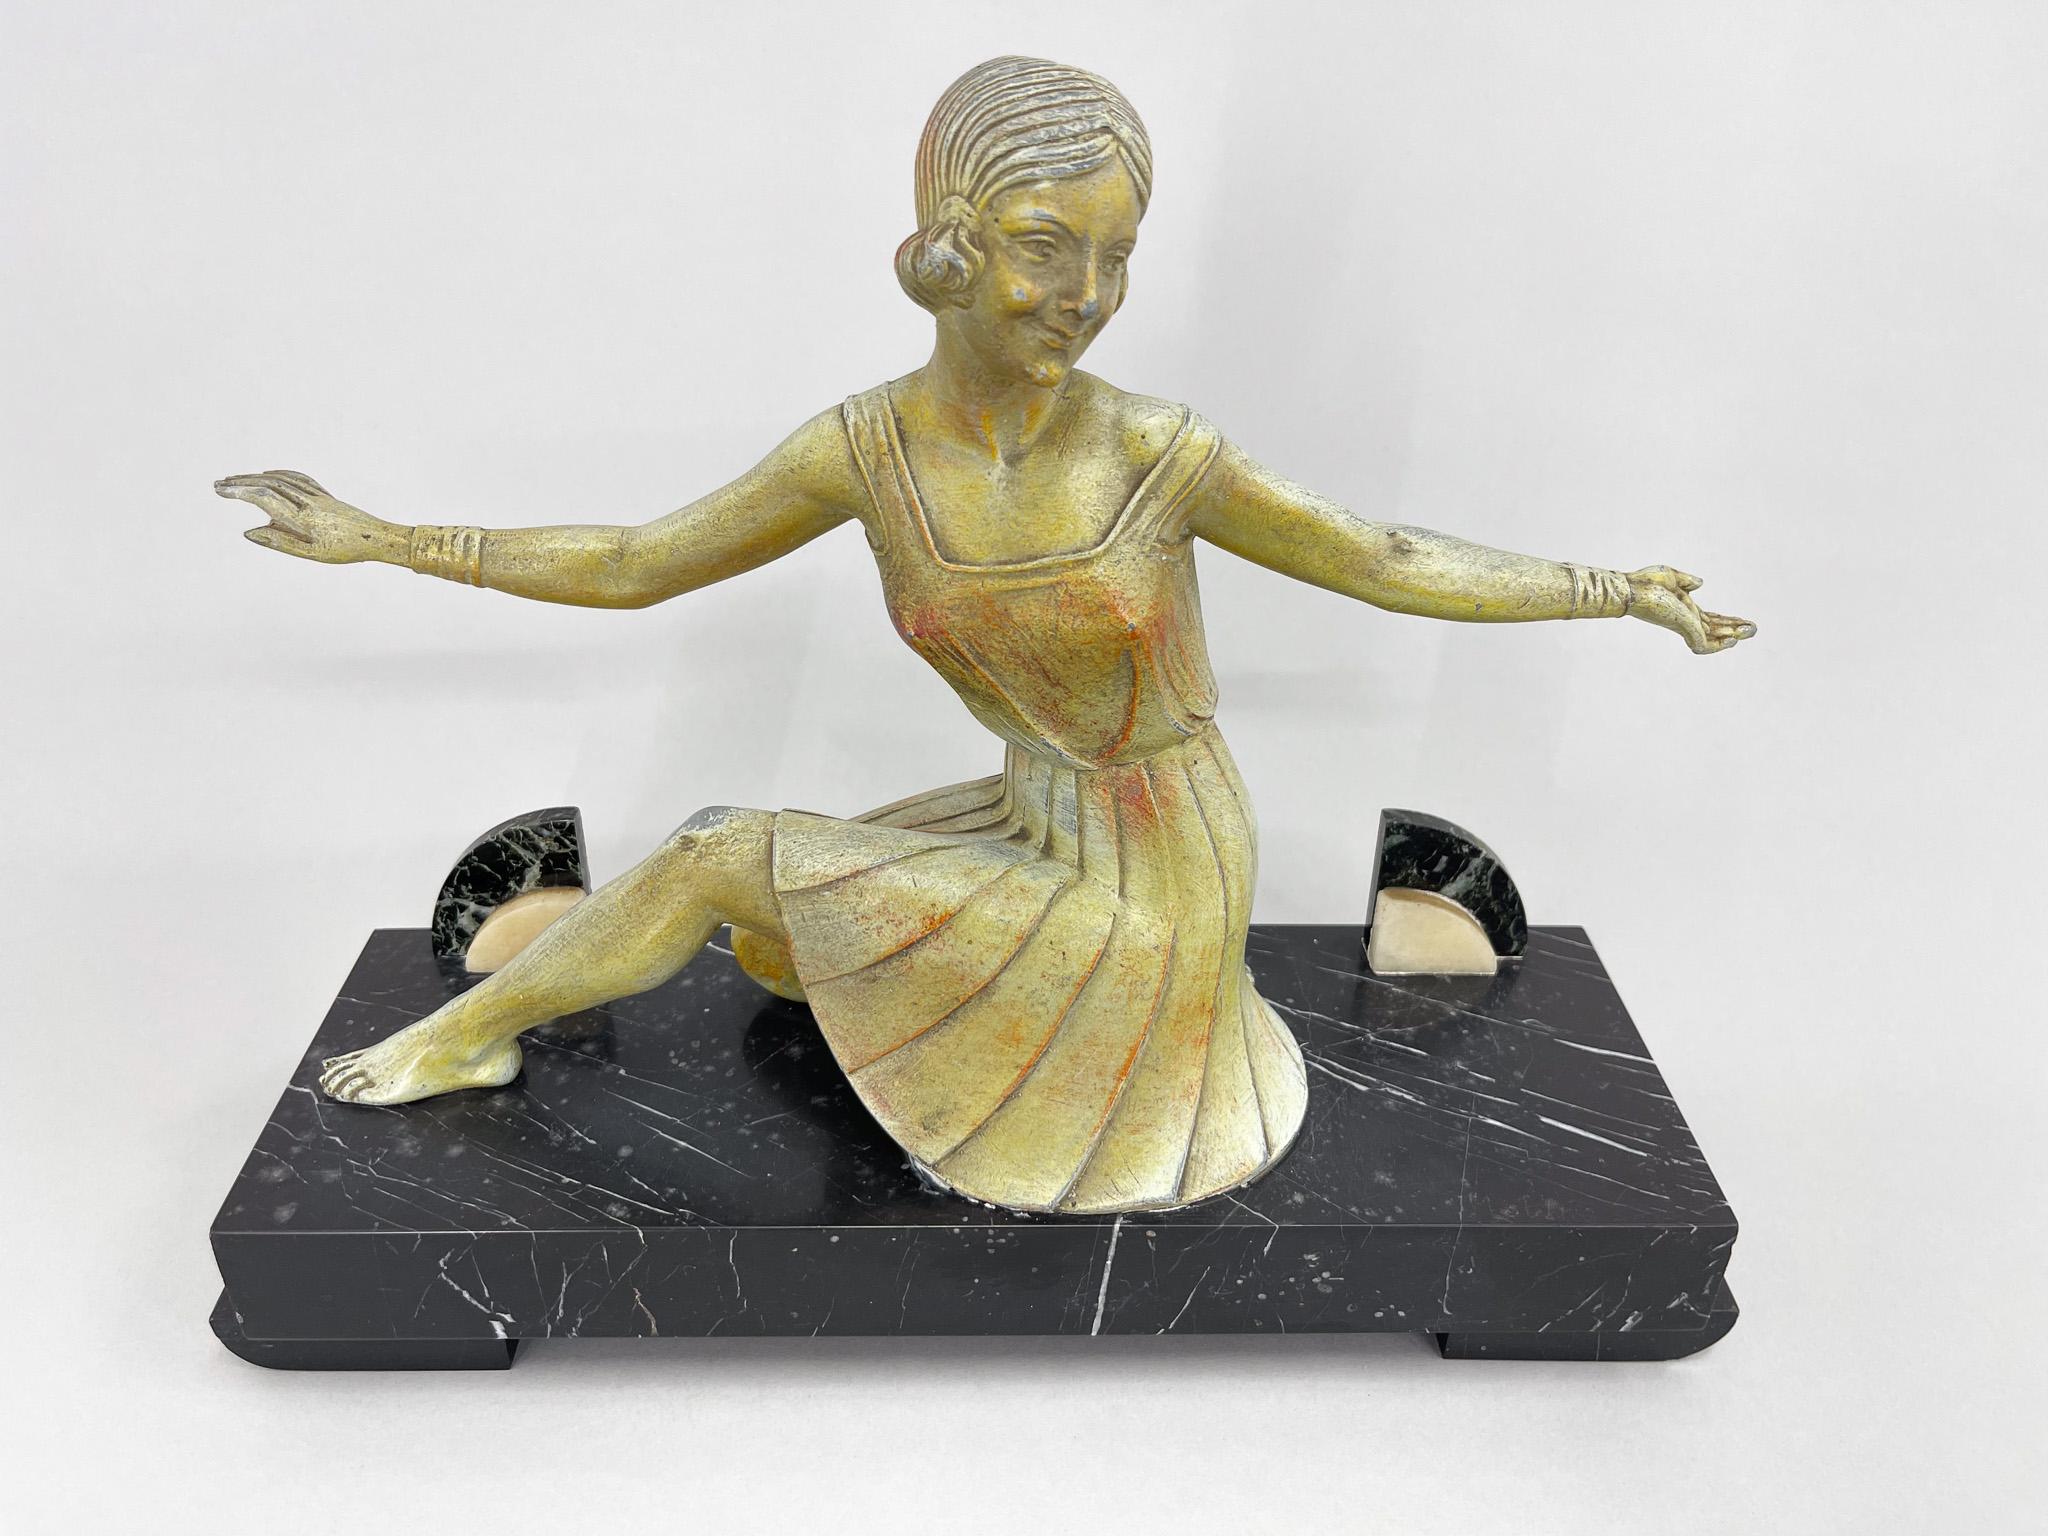 Beautiful art deco sculpture signed by Charles Henri Molins. The sculpture is signed by the author in the corner of the marble base.